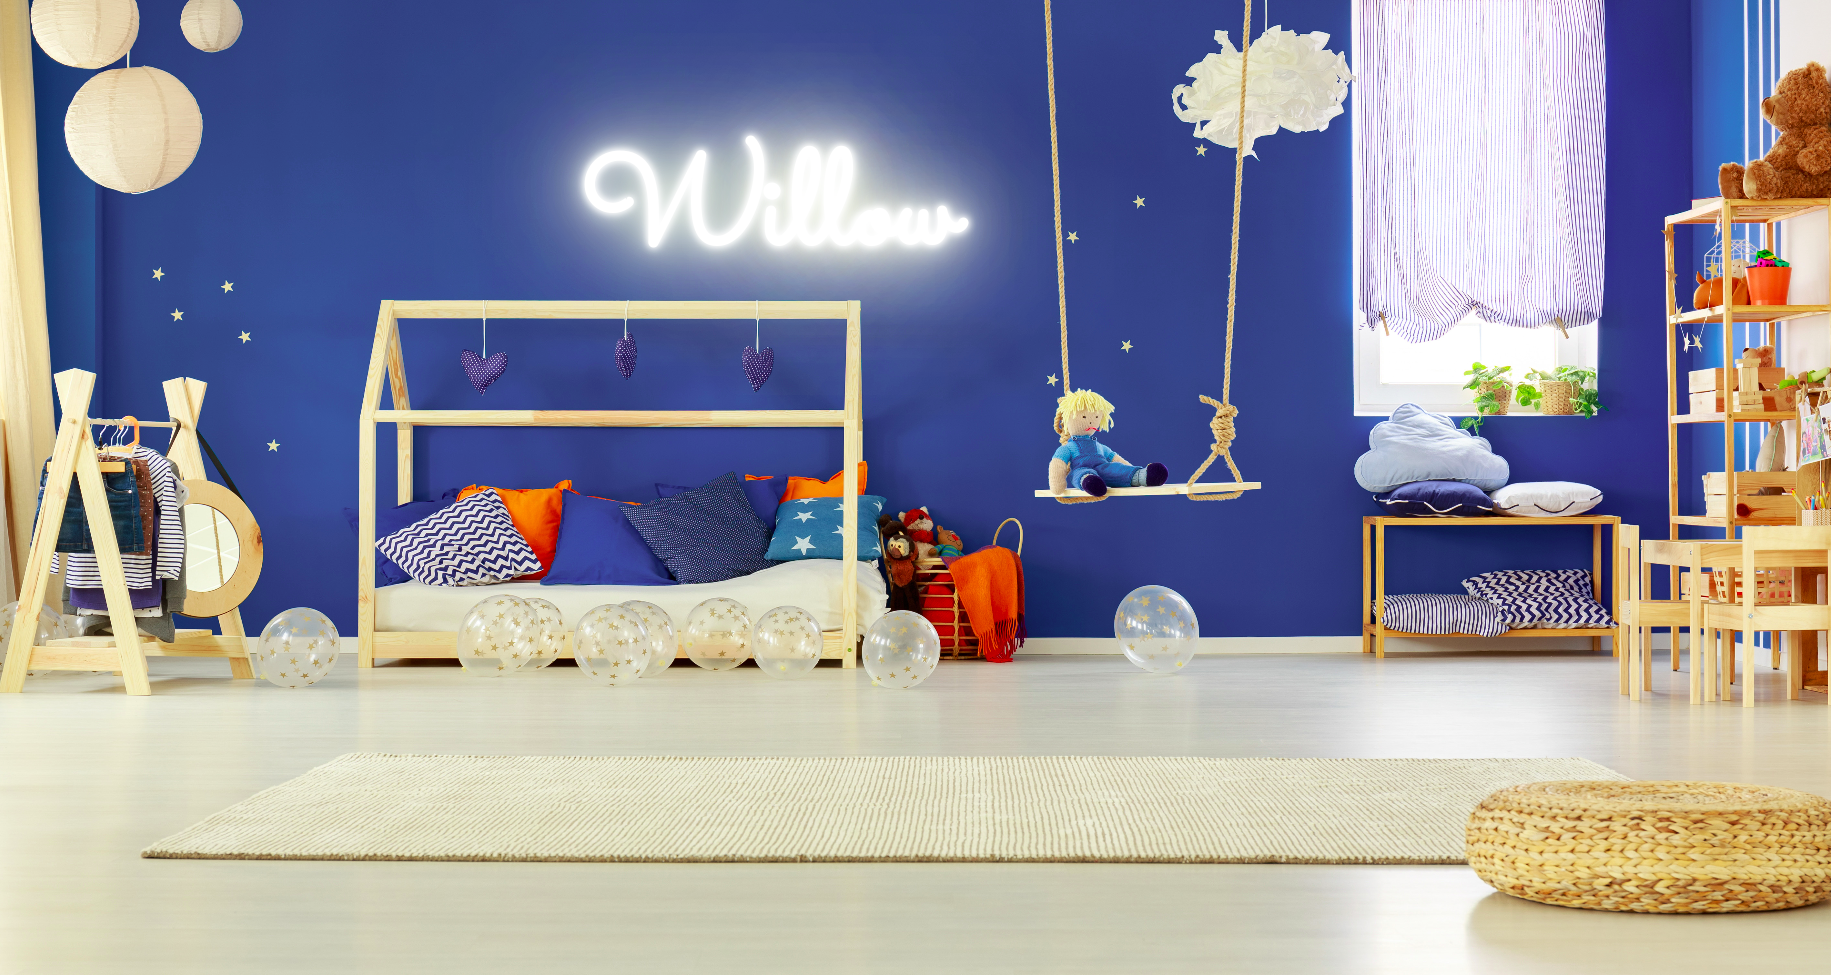 "Willow" Baby Name LED Neon Sign